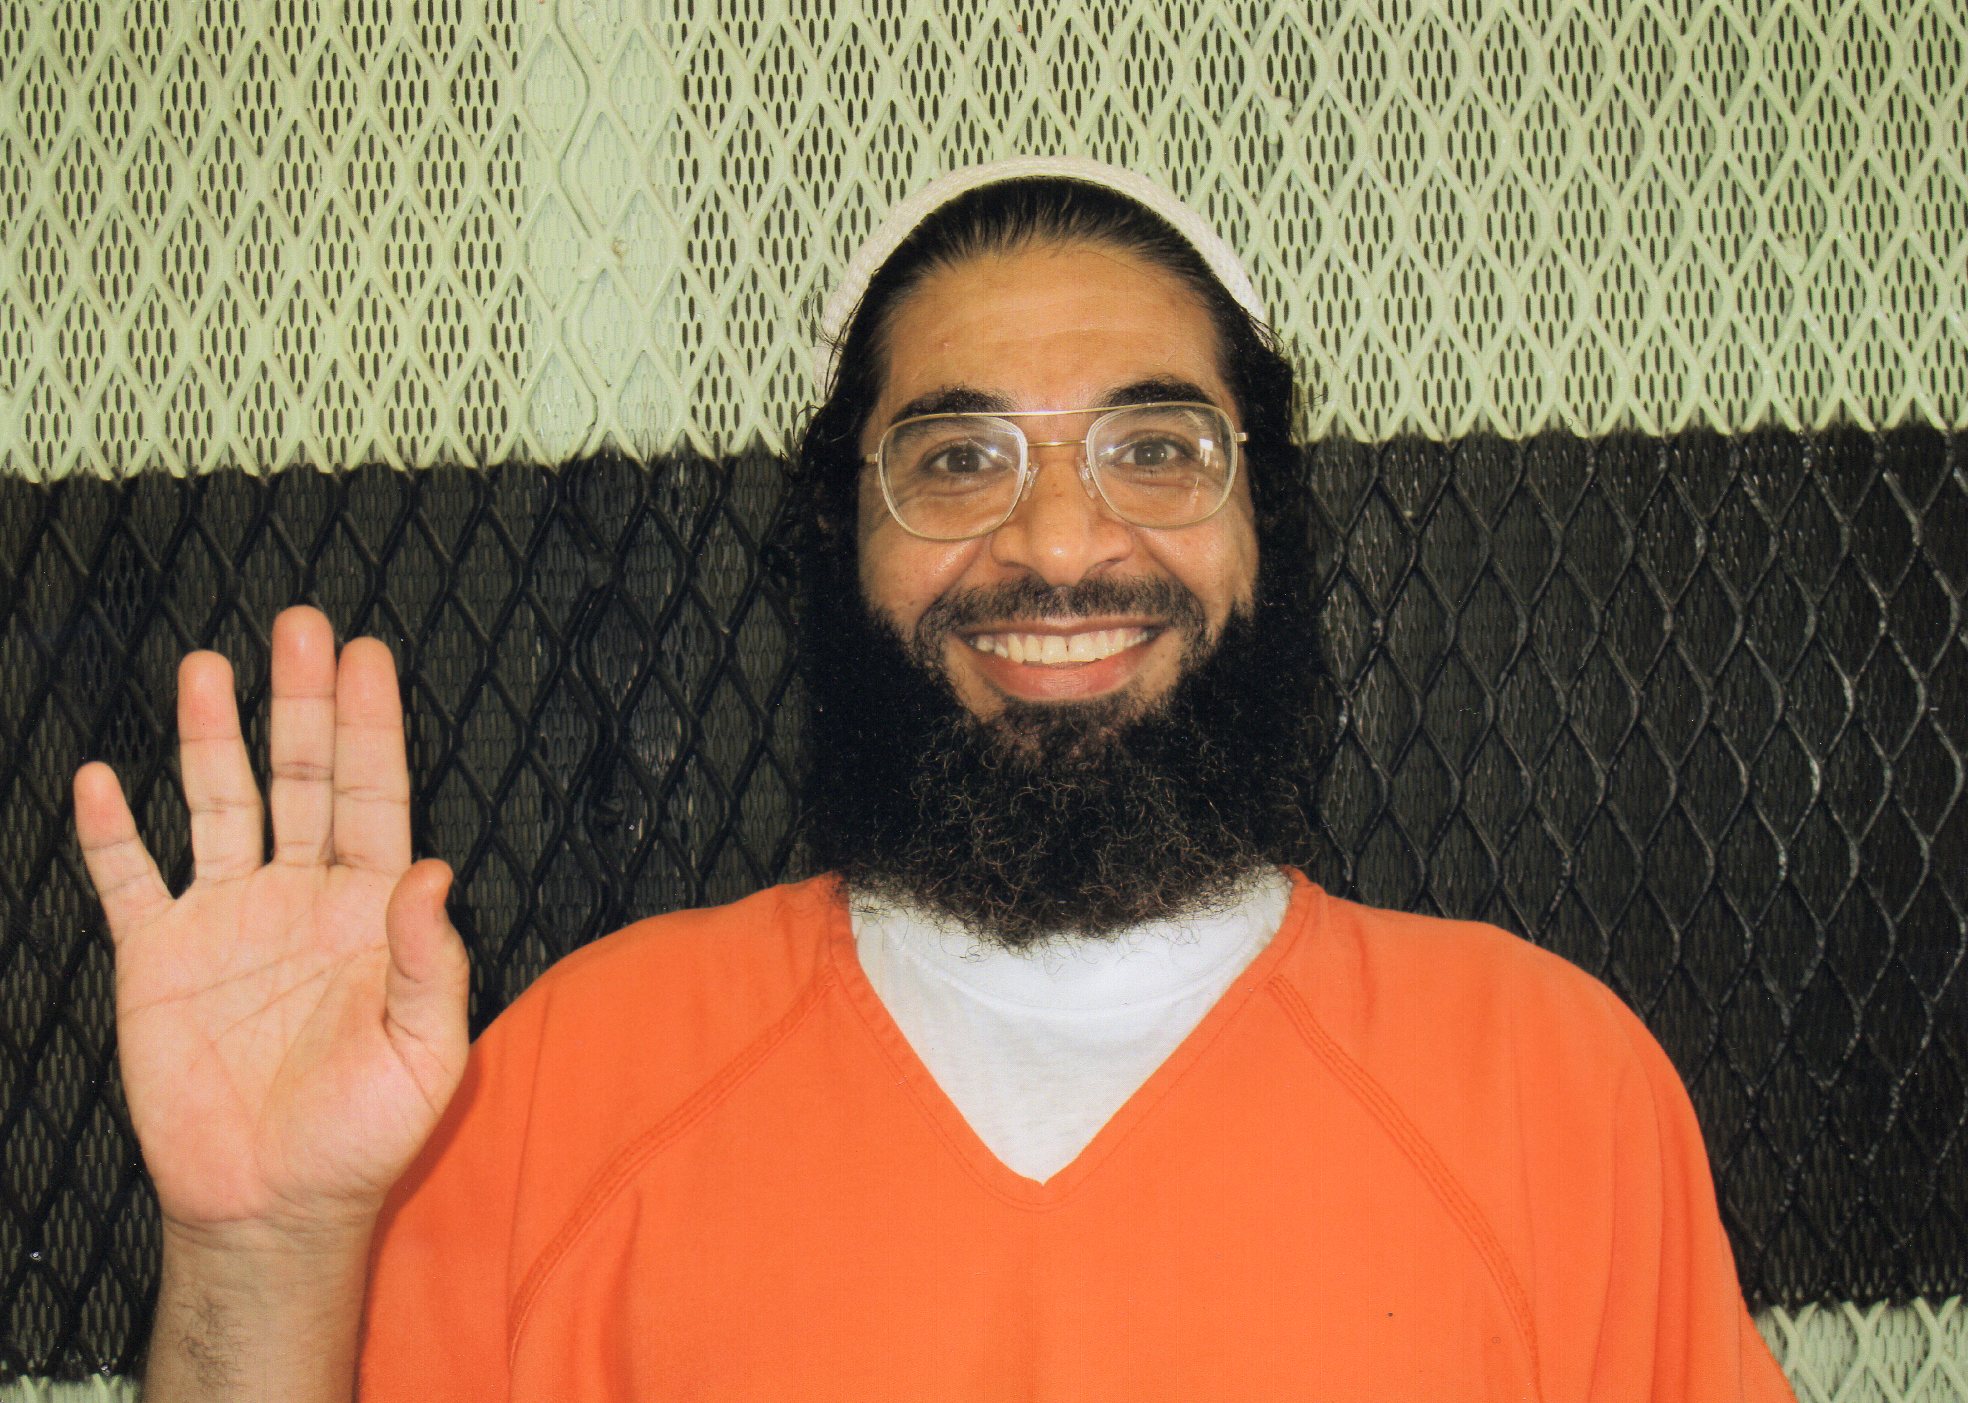 Shaker Aamer in a 2013 photo provided by the International Committee of the Red Cross.